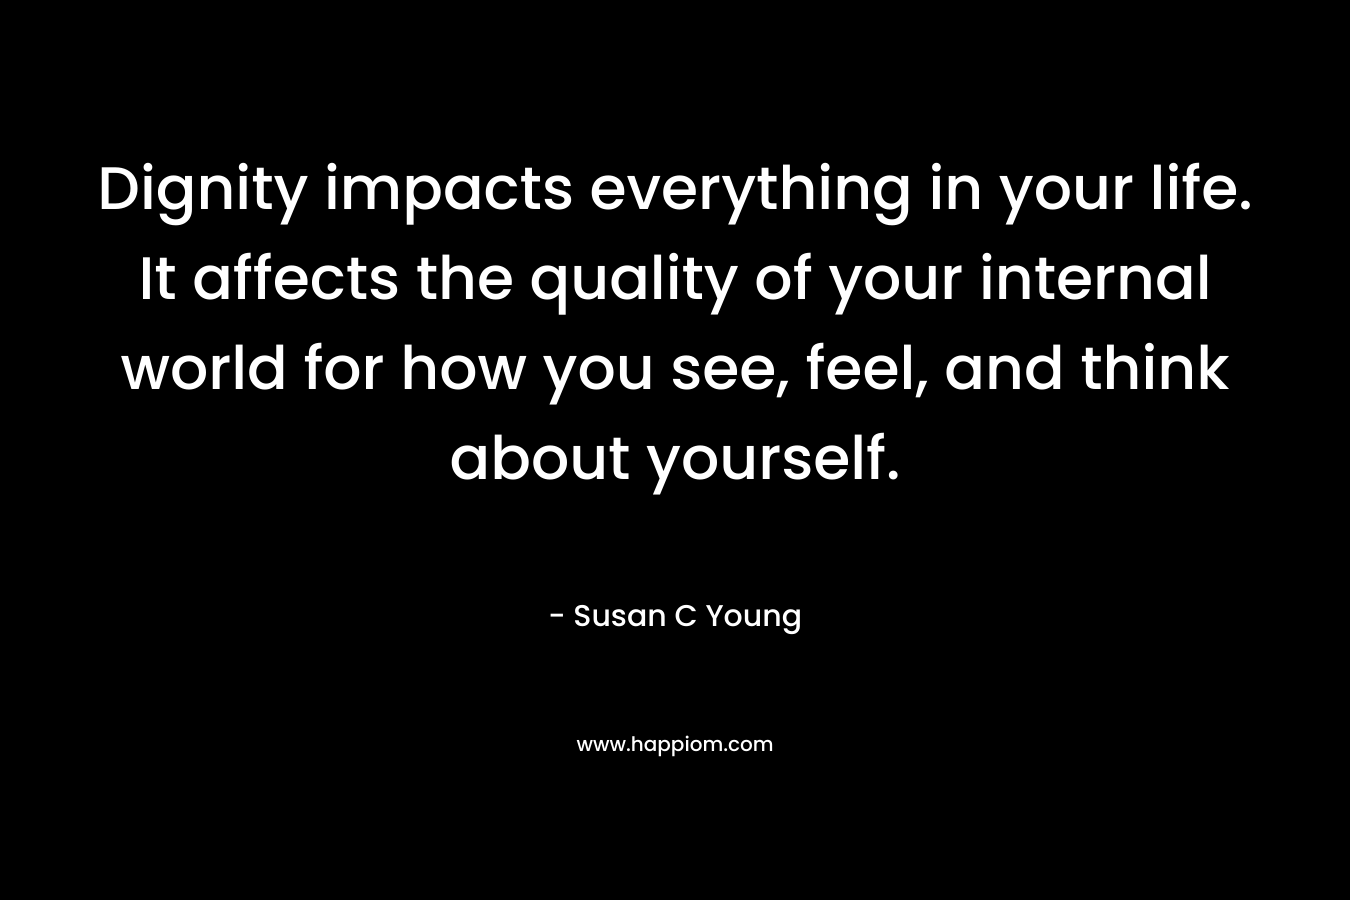 Dignity impacts everything in your life. It affects the quality of your internal world for how you see, feel, and think about yourself. – Susan C Young